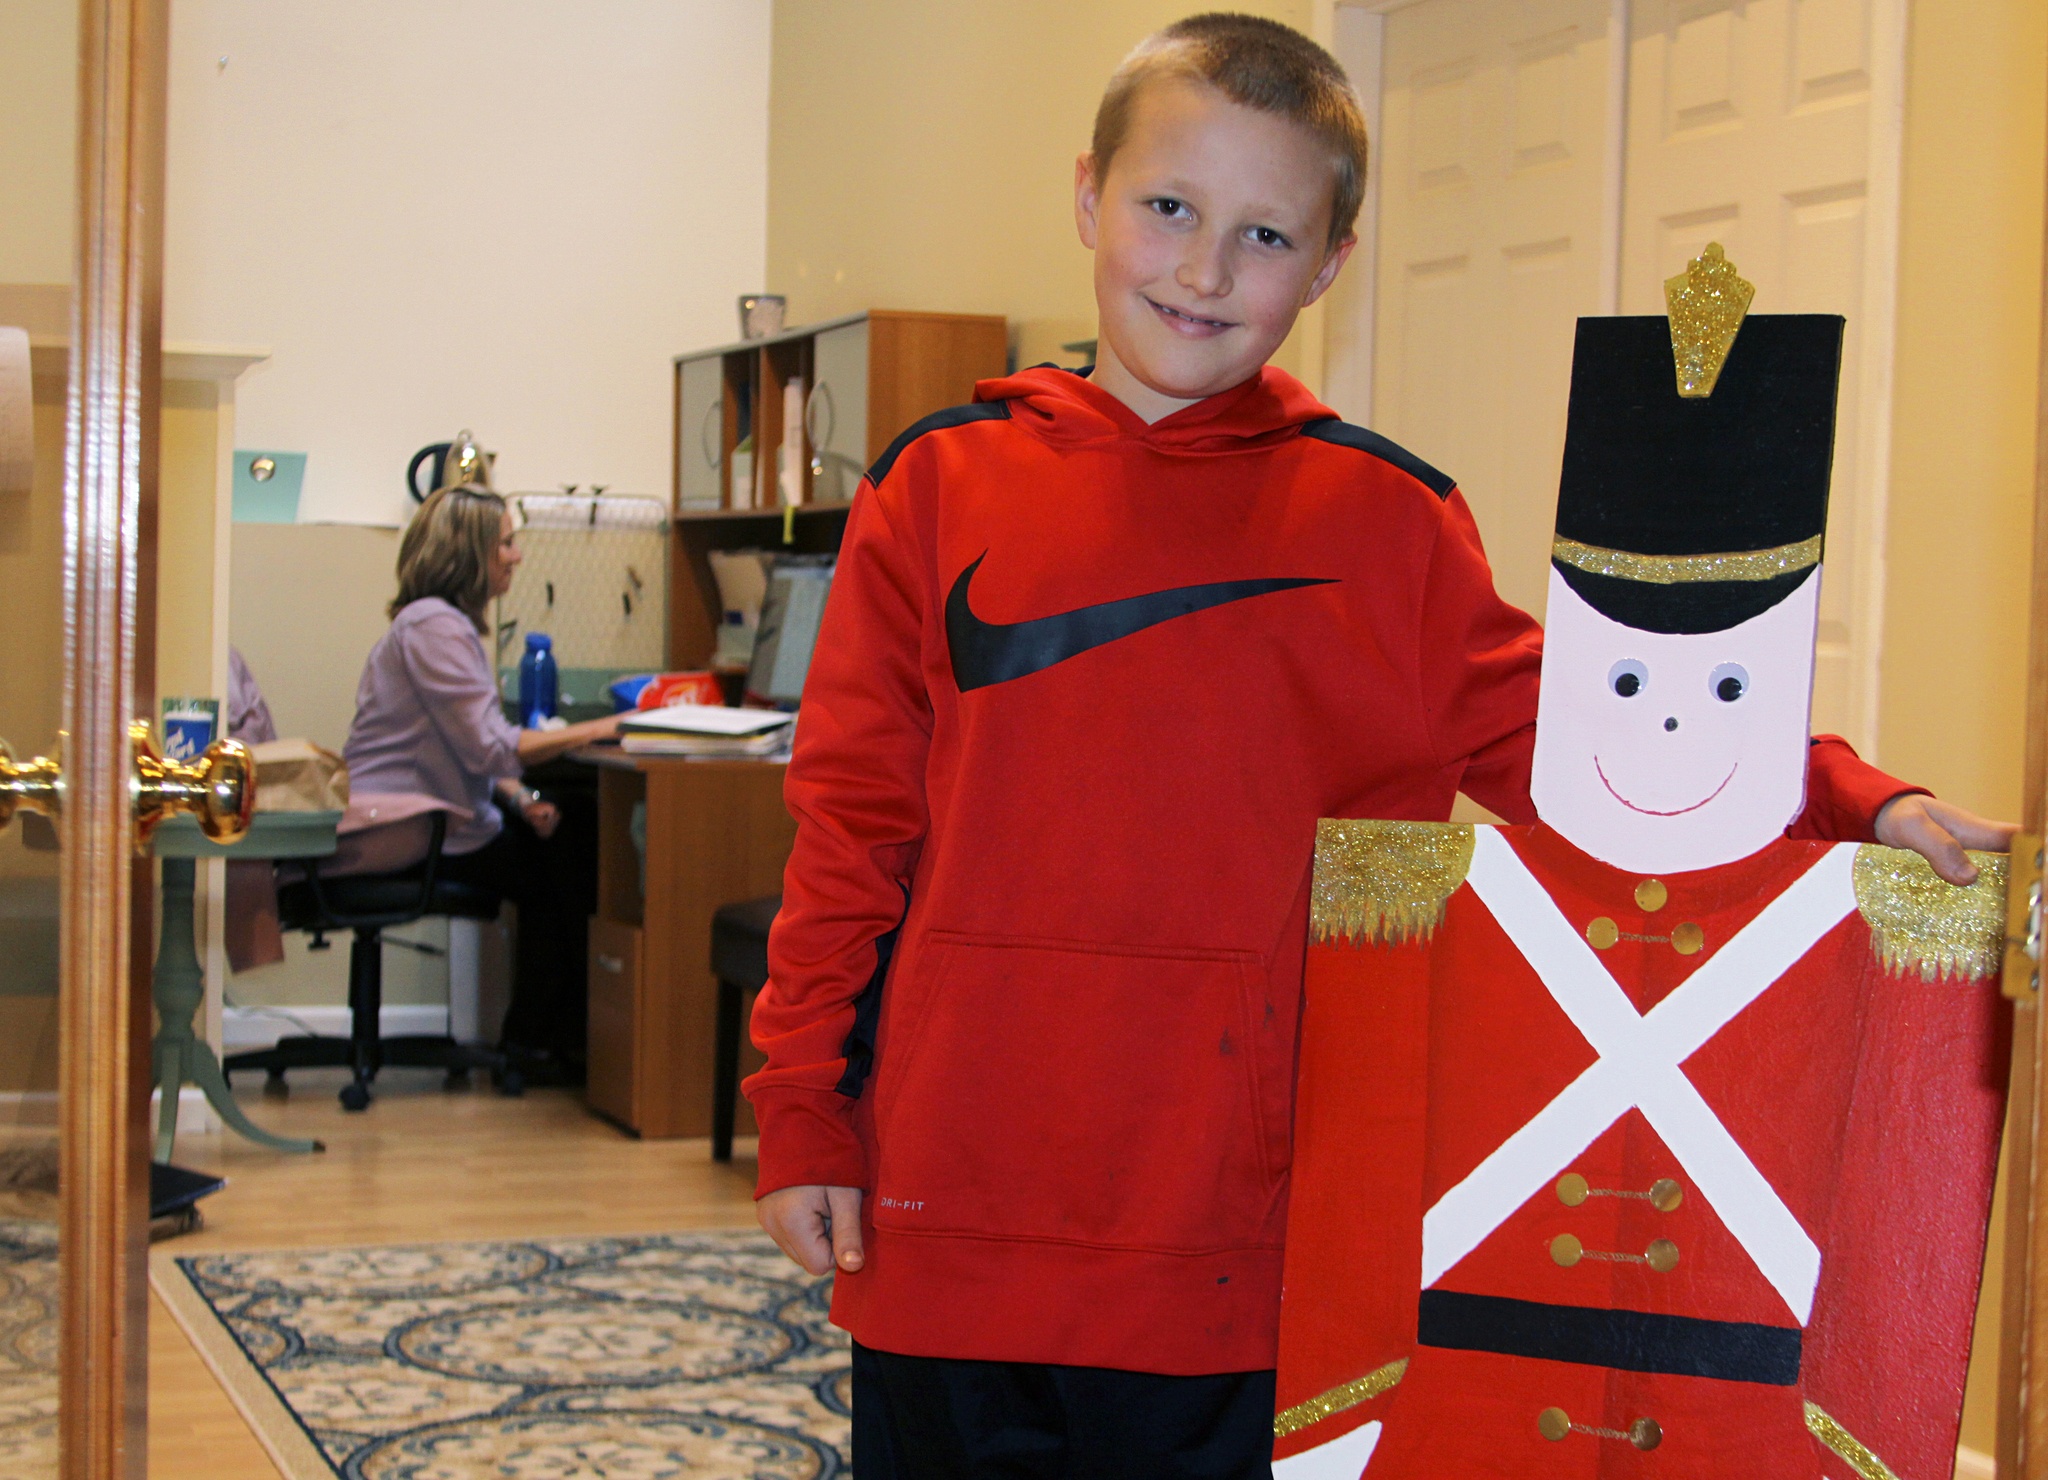 Ethan Riker, 9, gets better acquainted with a toy soldier that welcomes guests to the Oak Harbor Main Street office on Pioneer Way in Oak Harbor. The organization placed 34 of the soldiers up for adoption, asking community members and businesses to decorate them for public display downtown later this month. This one was painted by Whidbey Island artist Margaret Livermore. Photo by Ron Newberry/Whidbey News-Times